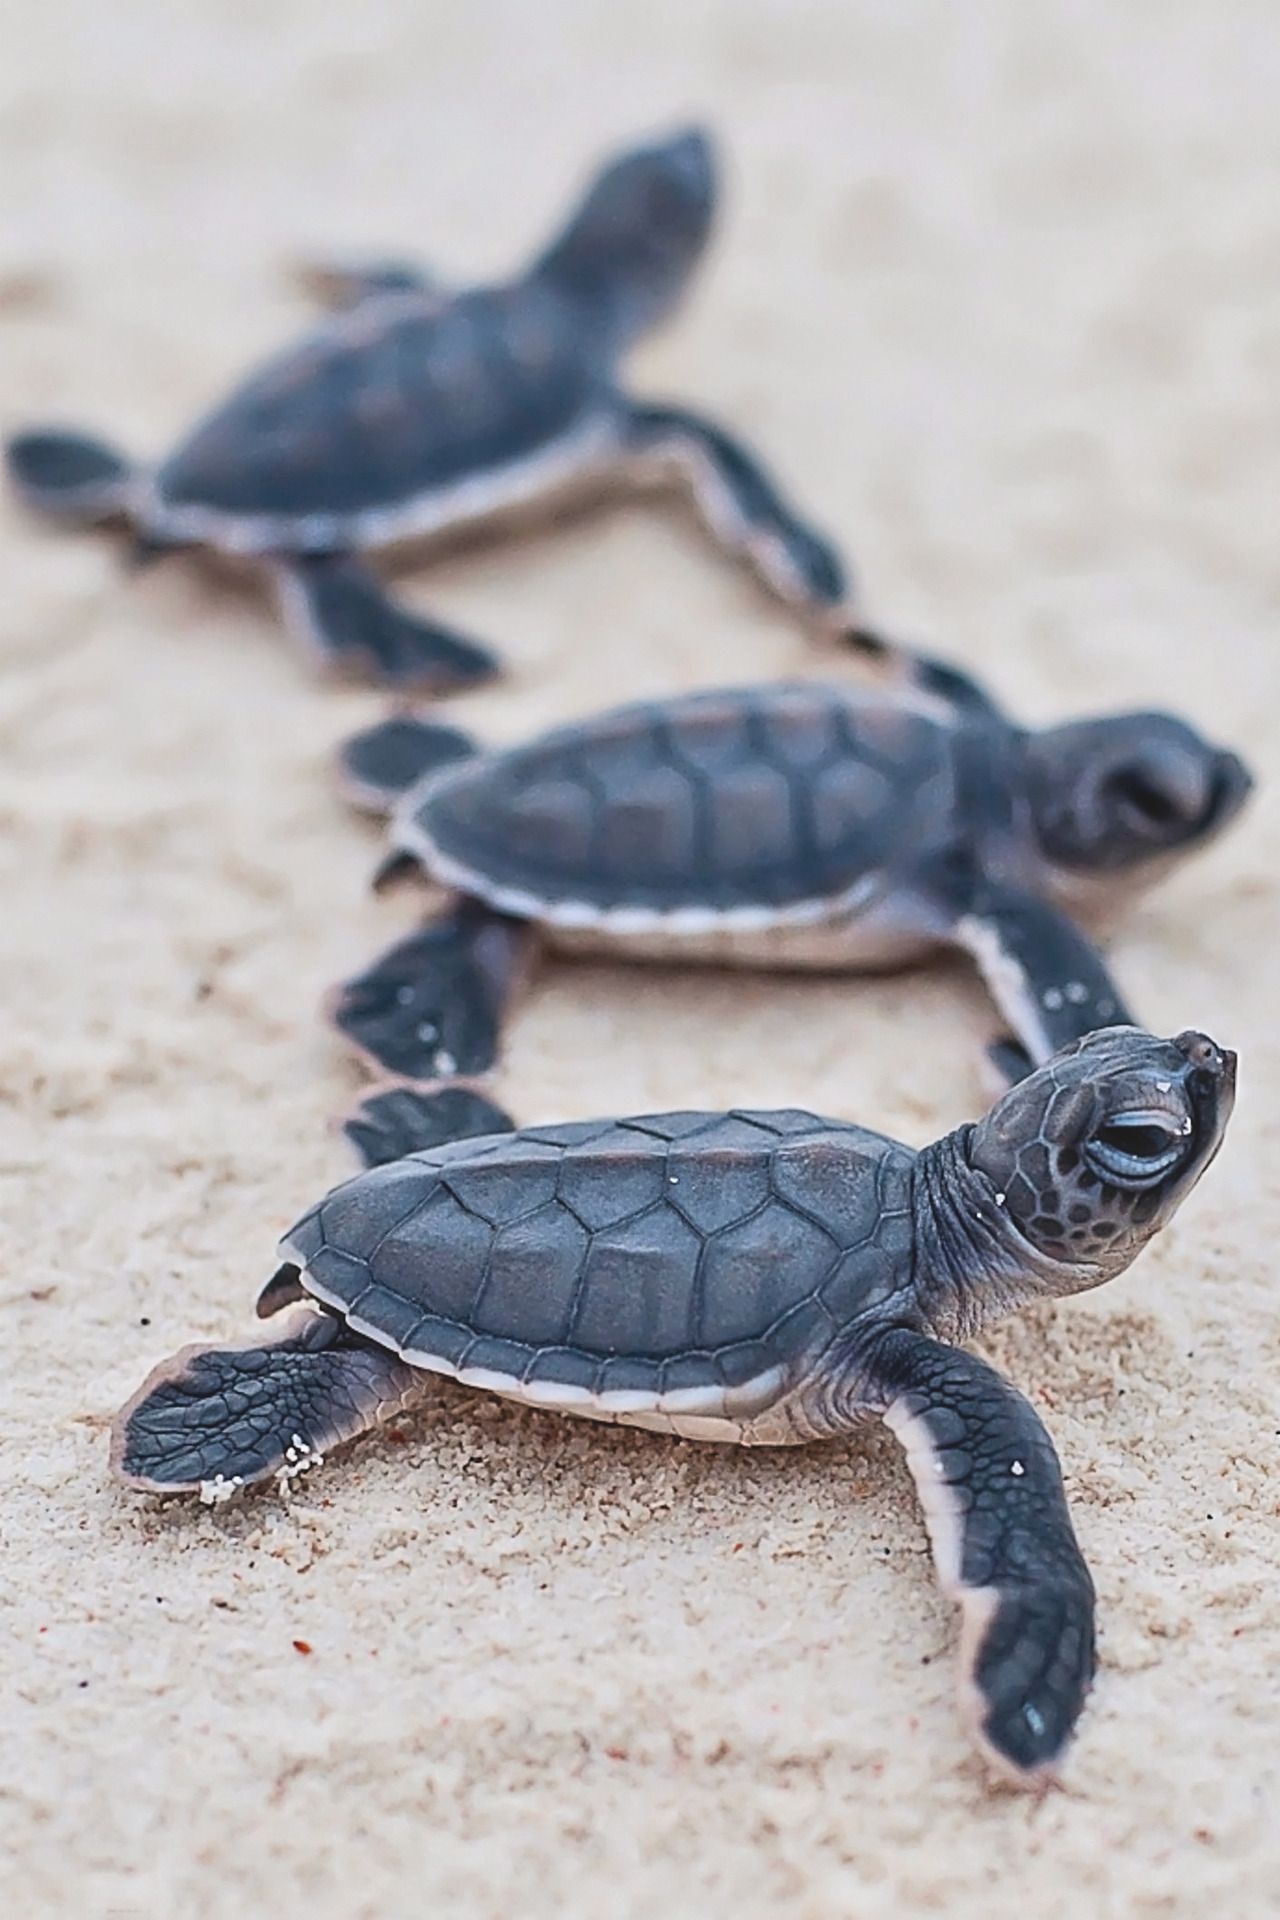 A group of baby turtles crawl on the sand. - Sea turtle